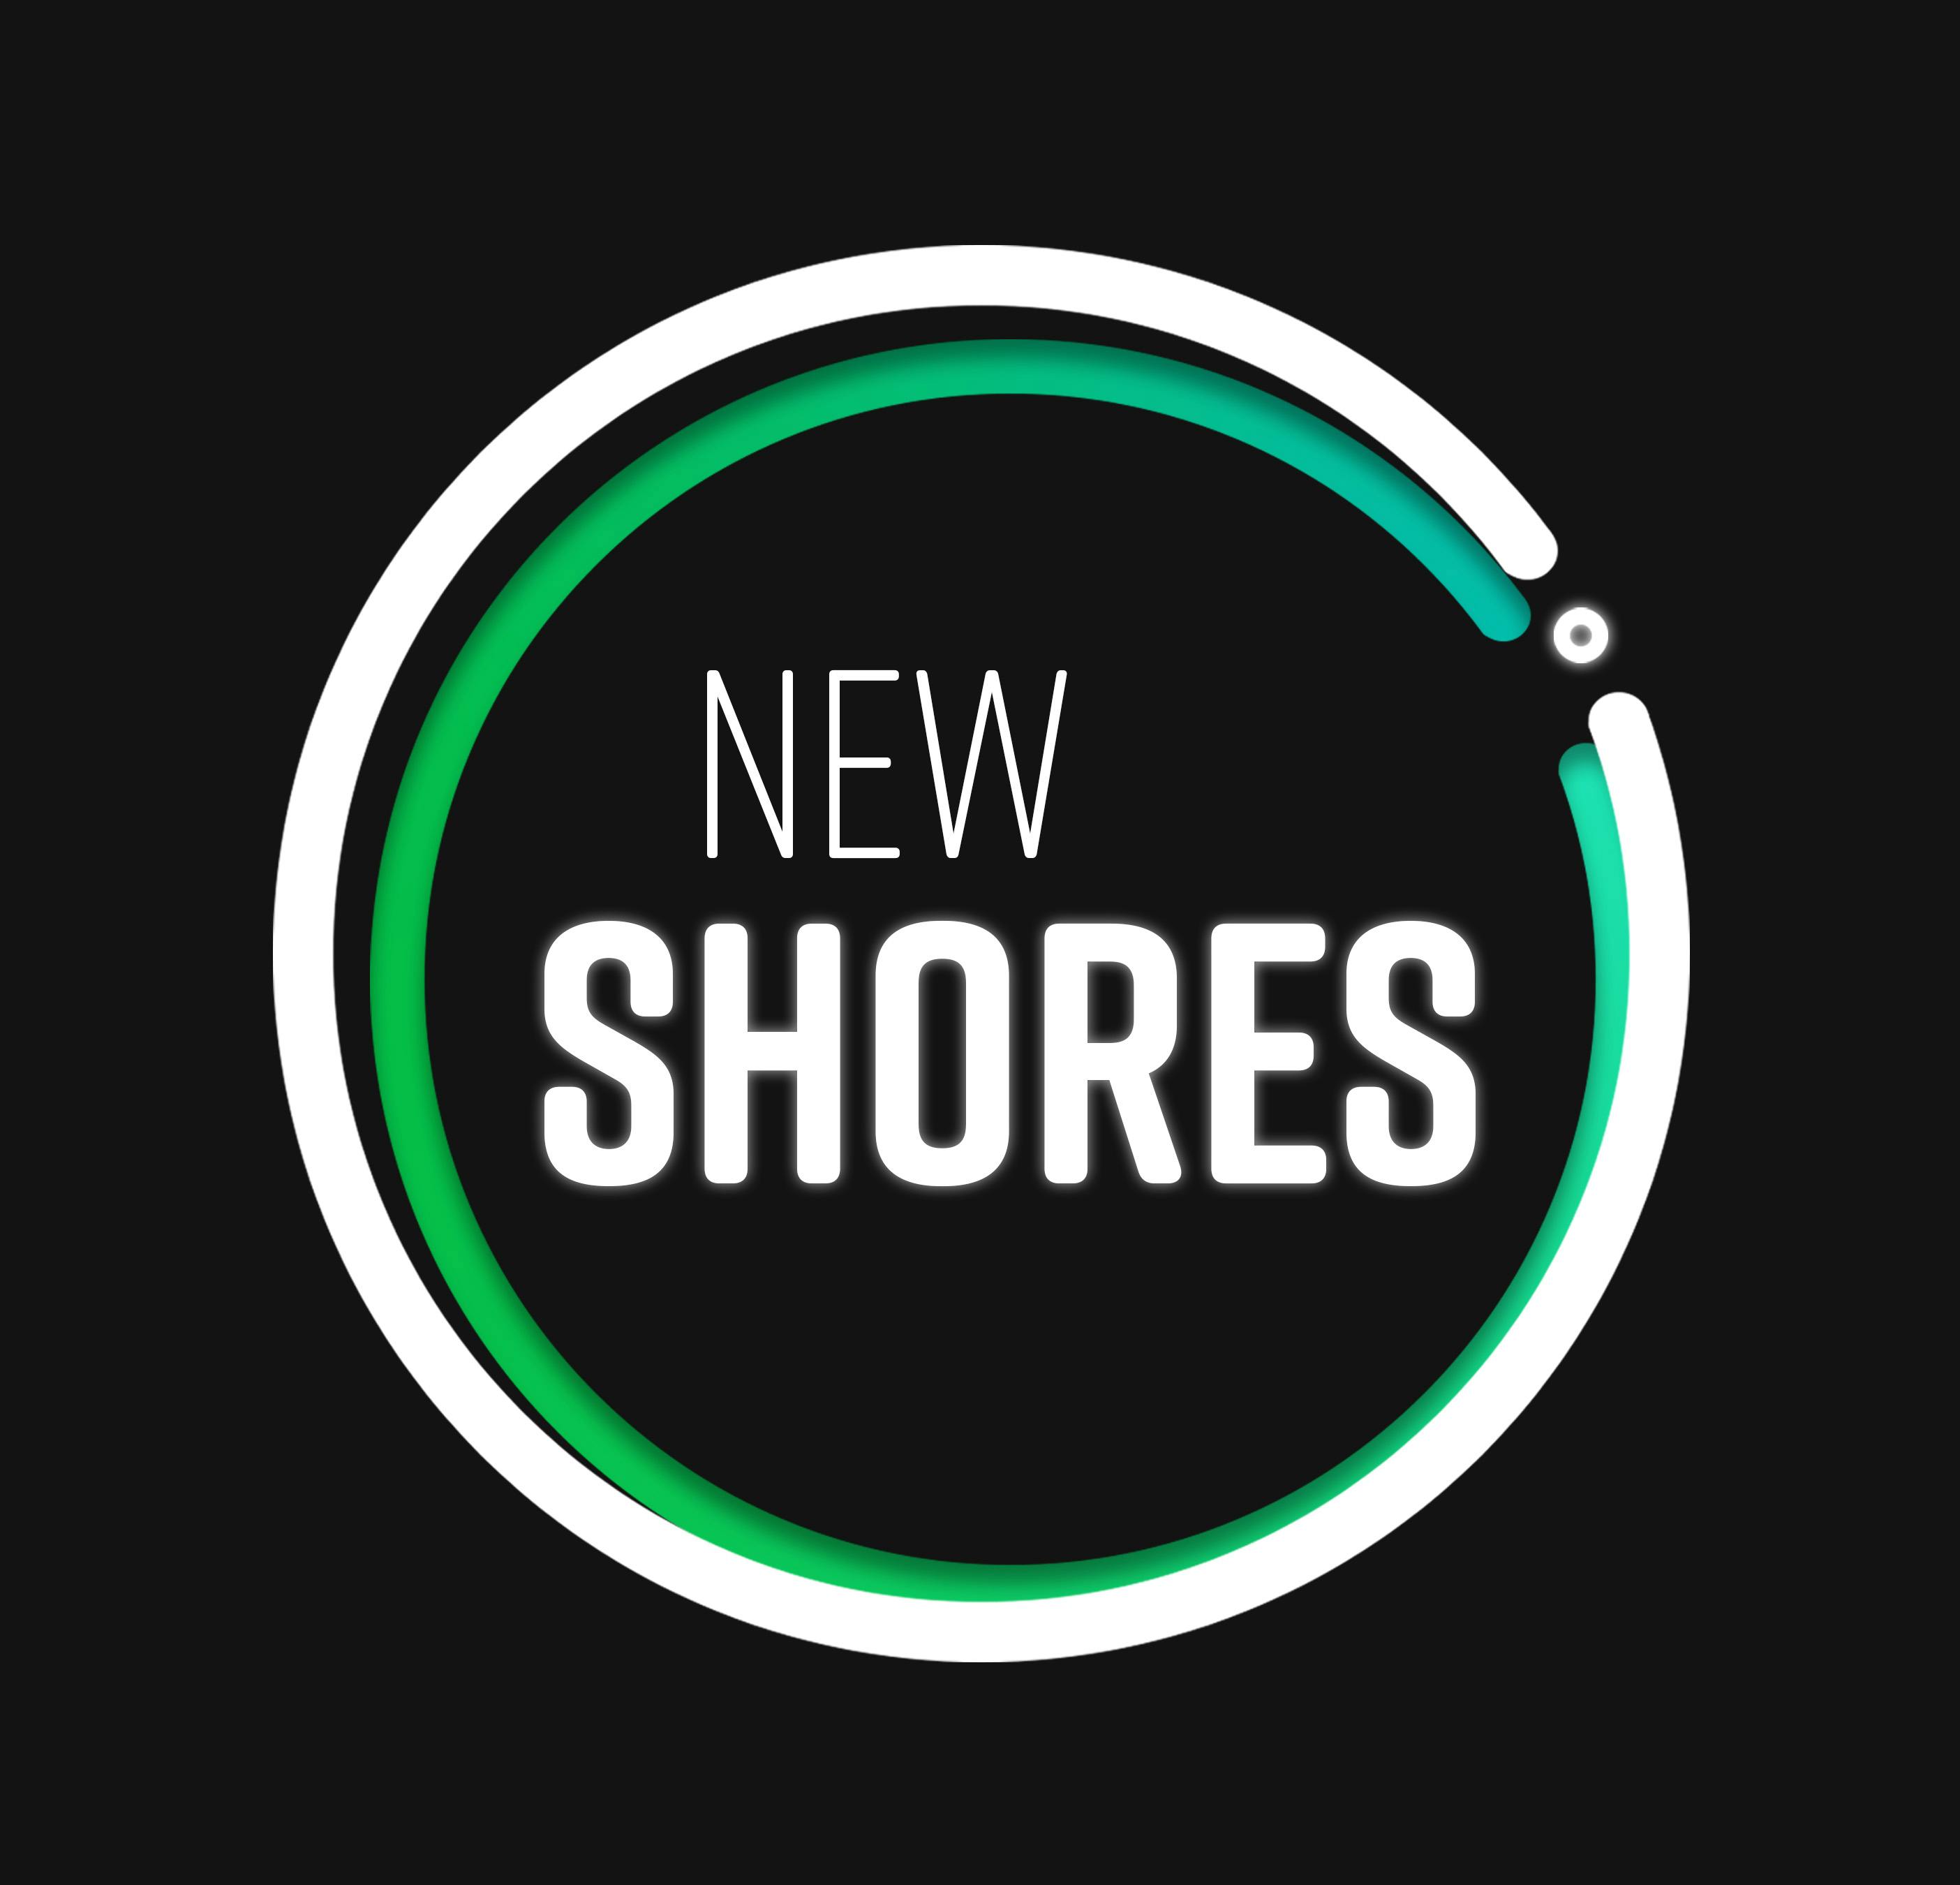 Introducing New Shores